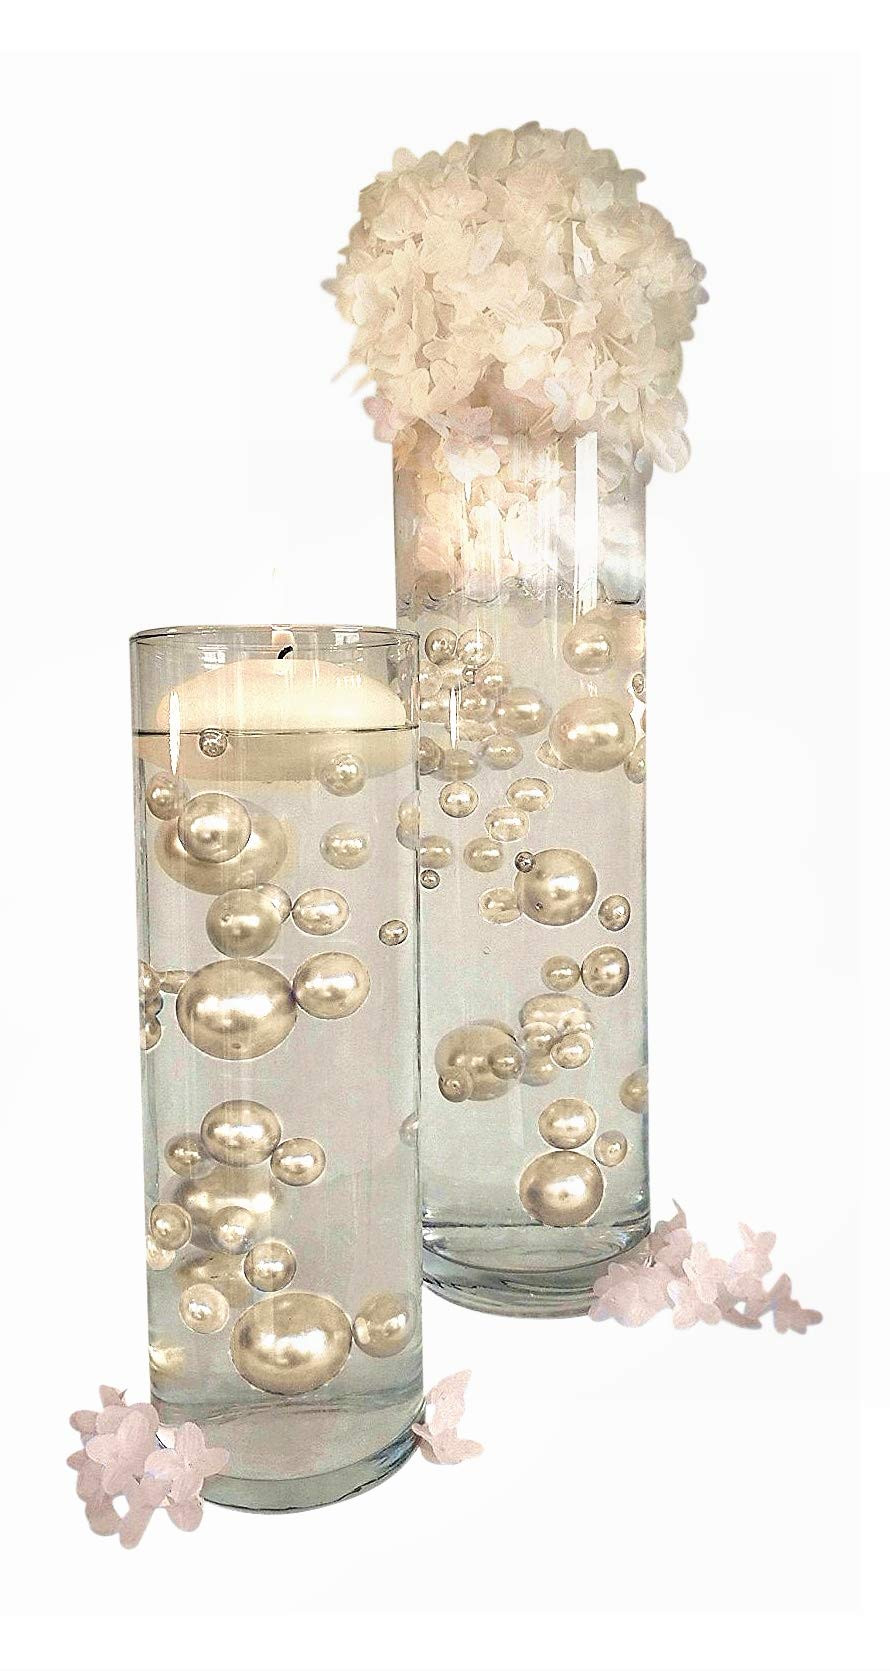 water beads vase filler of best floating pearls for centerpieces amazon com within floating no hole ivory pearls jumbo assorted sizes vase fillers for centerpieces decorations includes transparent water gels for floating the pearls